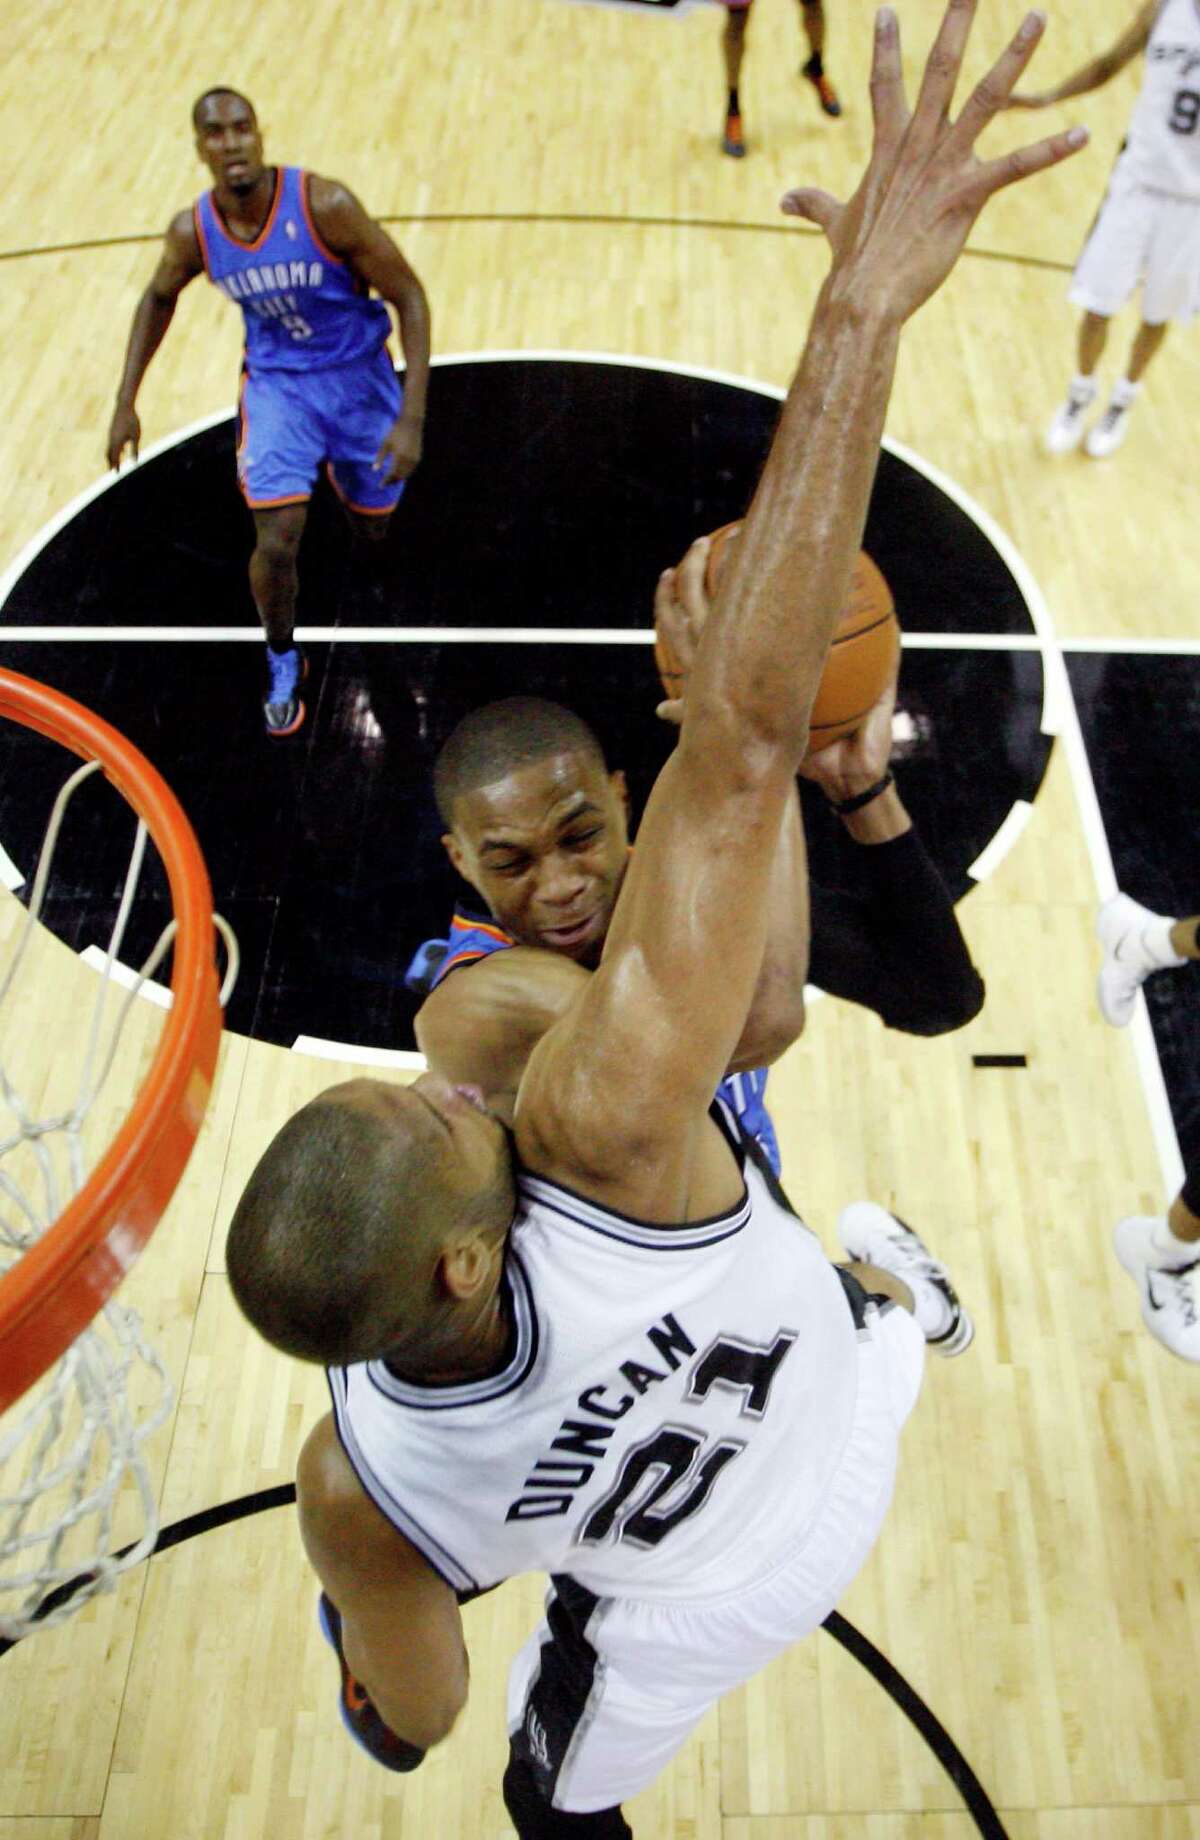 Oklahoma City Thunder point guard Russell Westbrook runs into San Antonio Spurs center Tim Duncan (21) on a shot attempt during the first half of Game 2 in their NBA basketball Western Conference finals playoff series, Tuesday, May 29, 2012, in San Antonio. (AP Photo/Mike Stone, Pool)